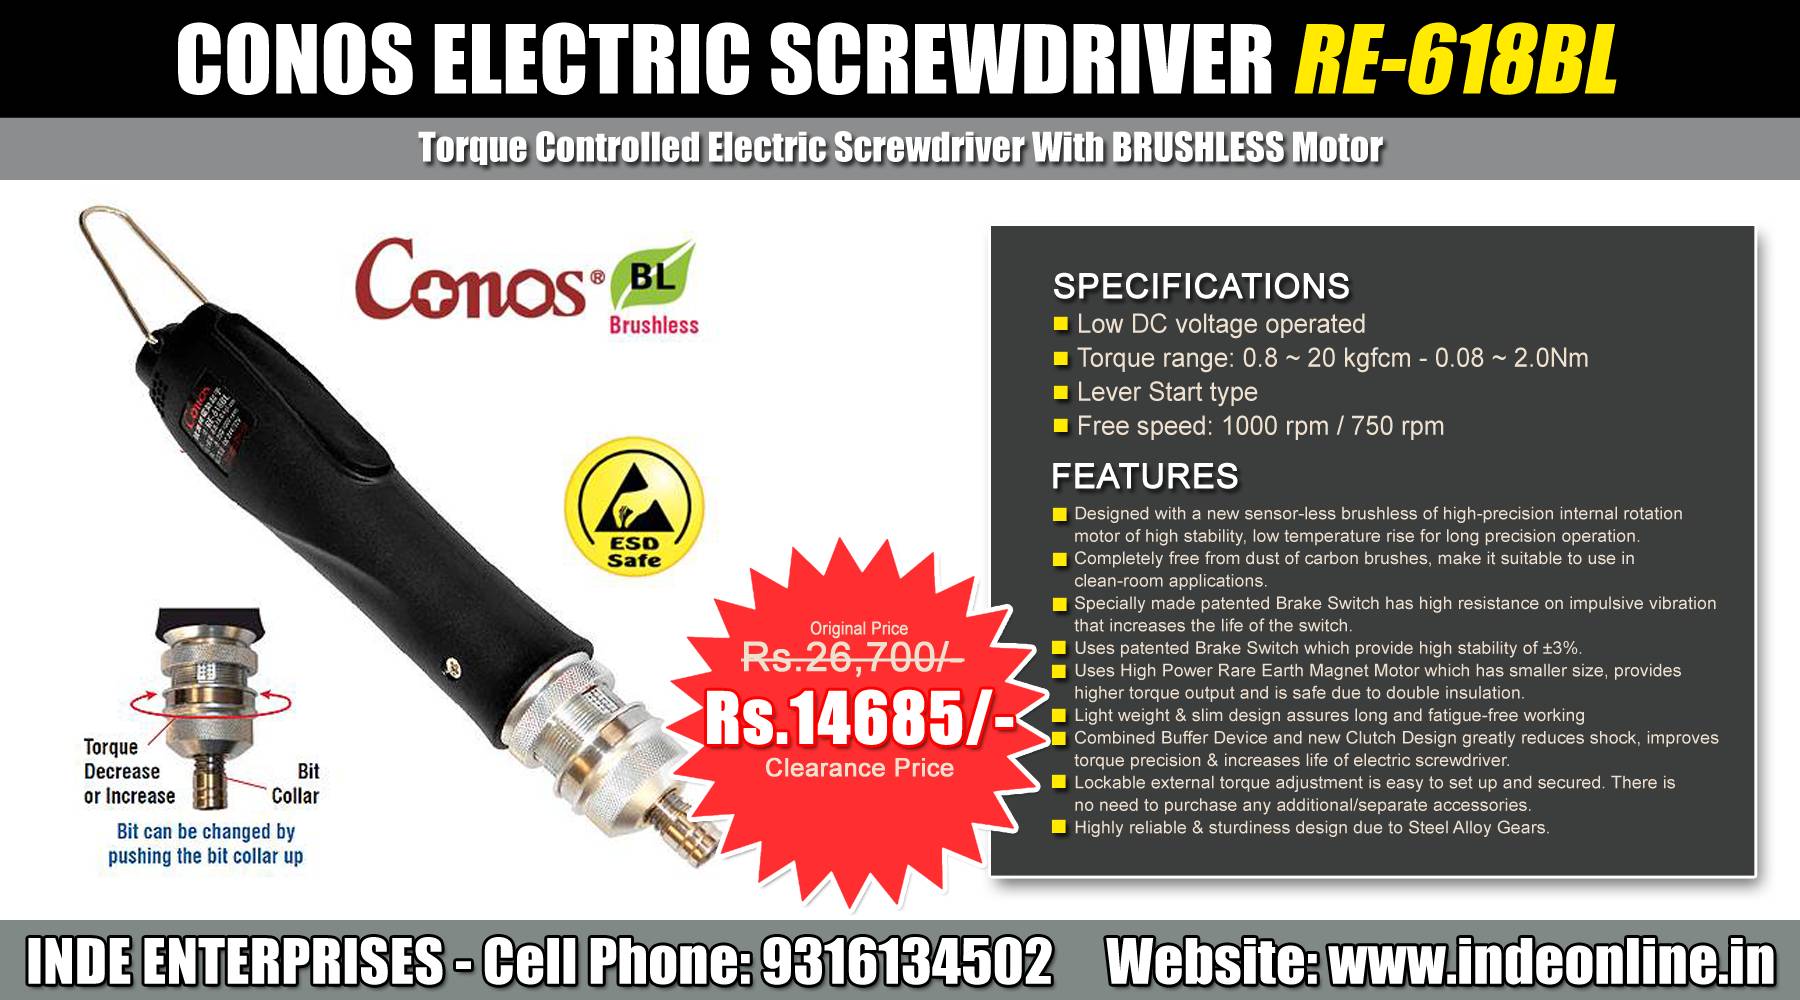 Conos Electric Screwdriver RE-618BL Price Rs.14685/-